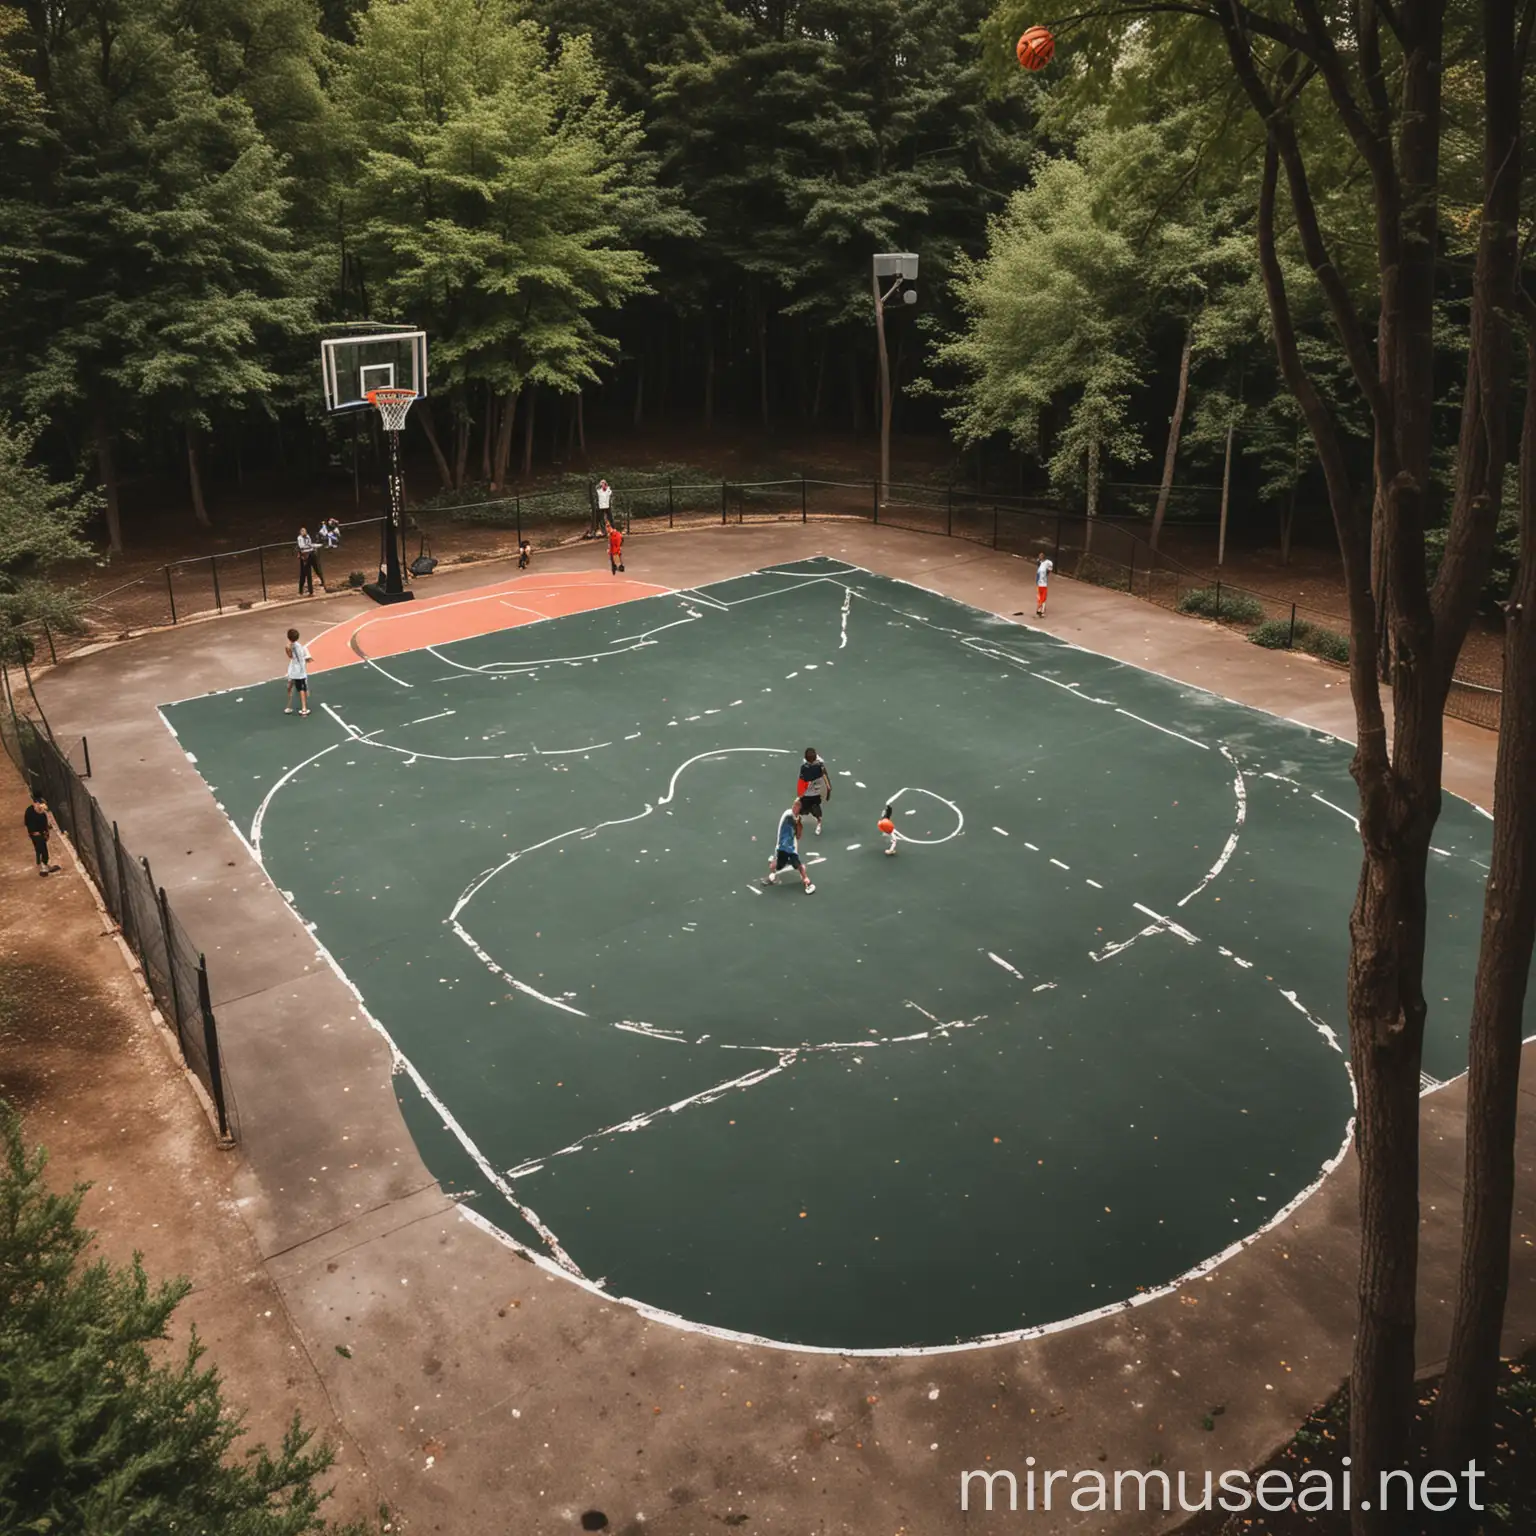 make me an ambiance of a sports basketball court surrounded by trees with kids playing basketball